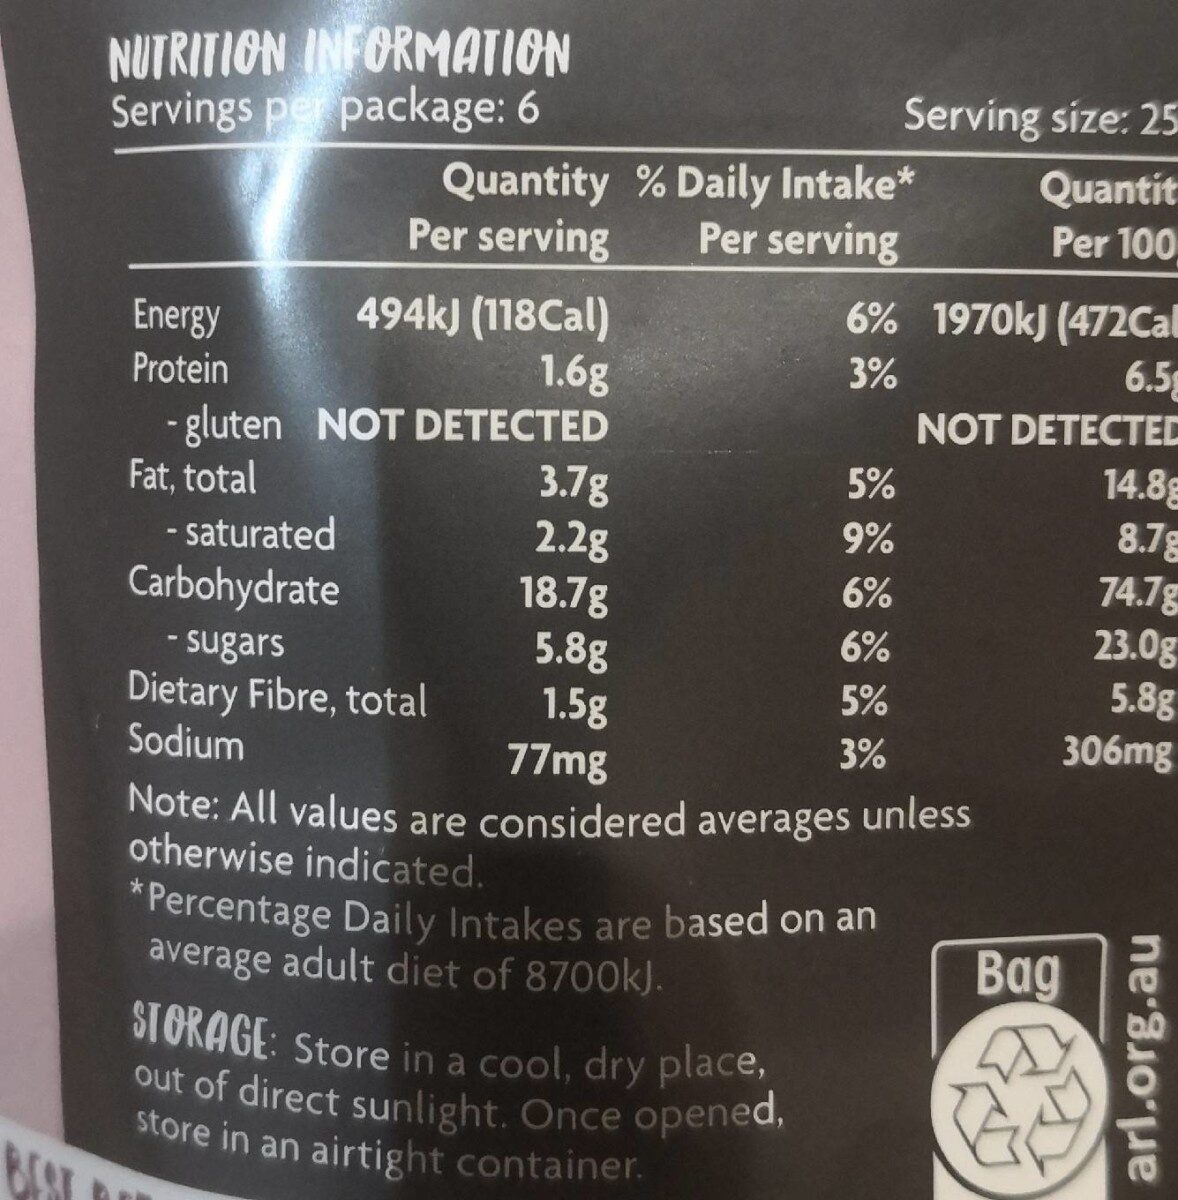 Cheeky monkey - Nutrition facts